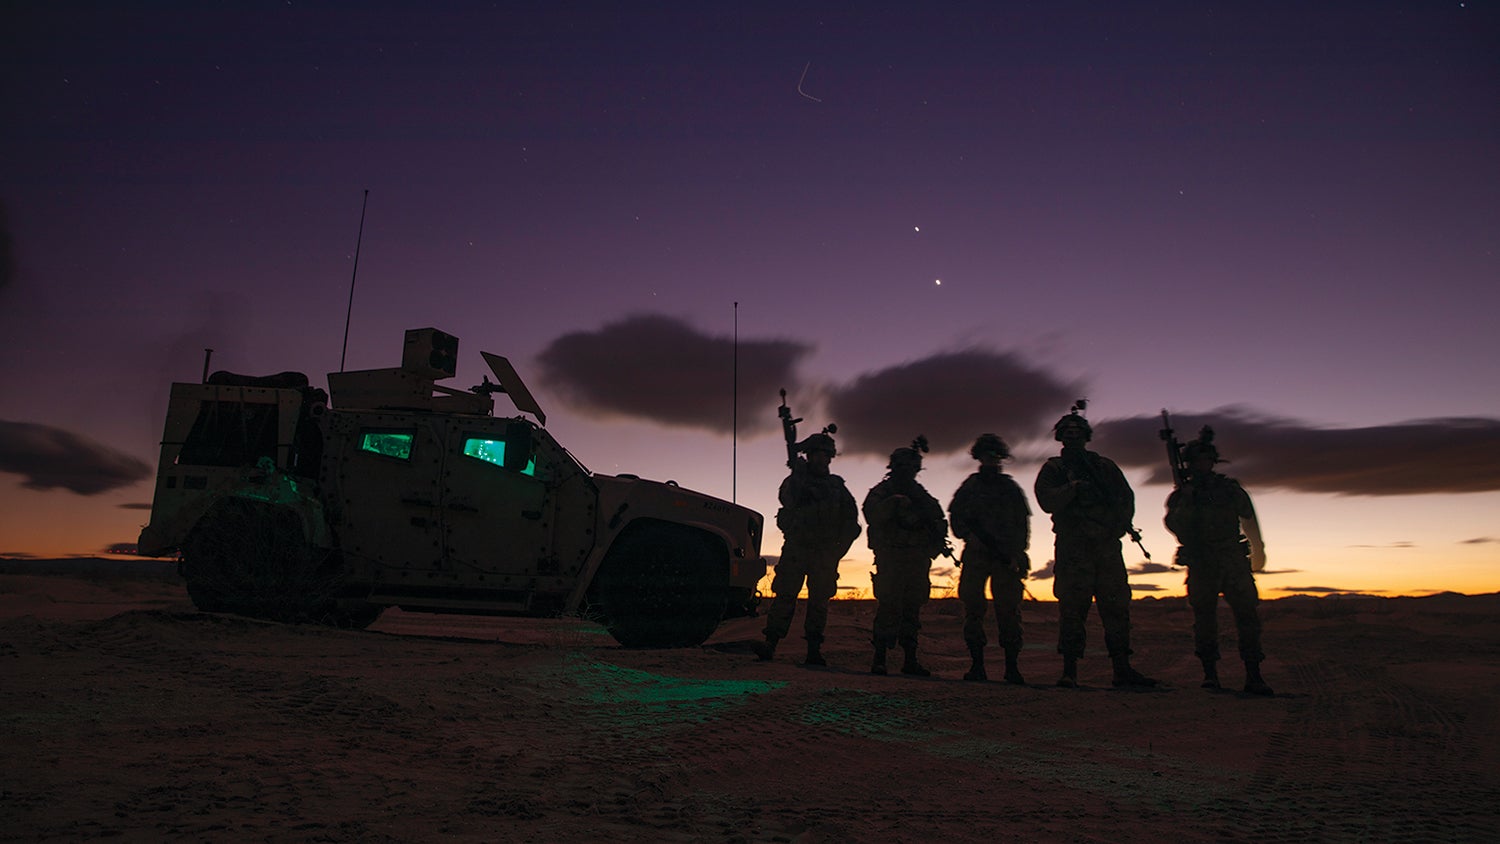 Soldiers with the 2nd Armored Brigade Combat Team, 3rd Infantry Division, stand near their Joint Light Tactical Vehicle at the National Training Center, Fort Irwin, California. (Credit: U.S. Army/Sgt. Dre Stout)